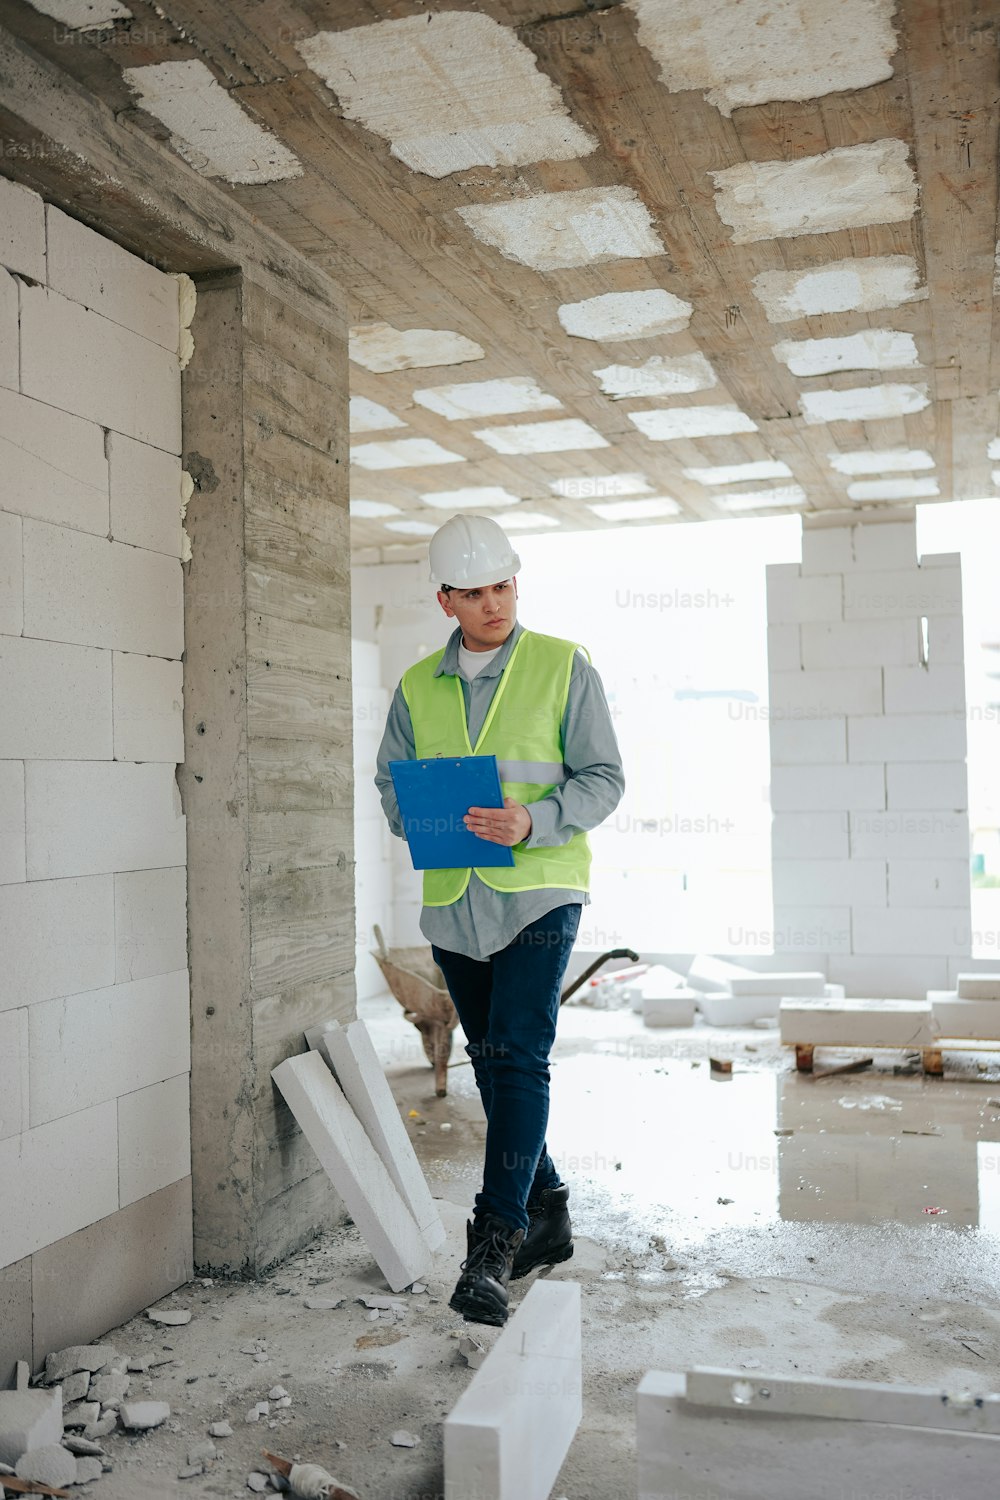 a man in a hard hat and safety vest standing in a building under construction